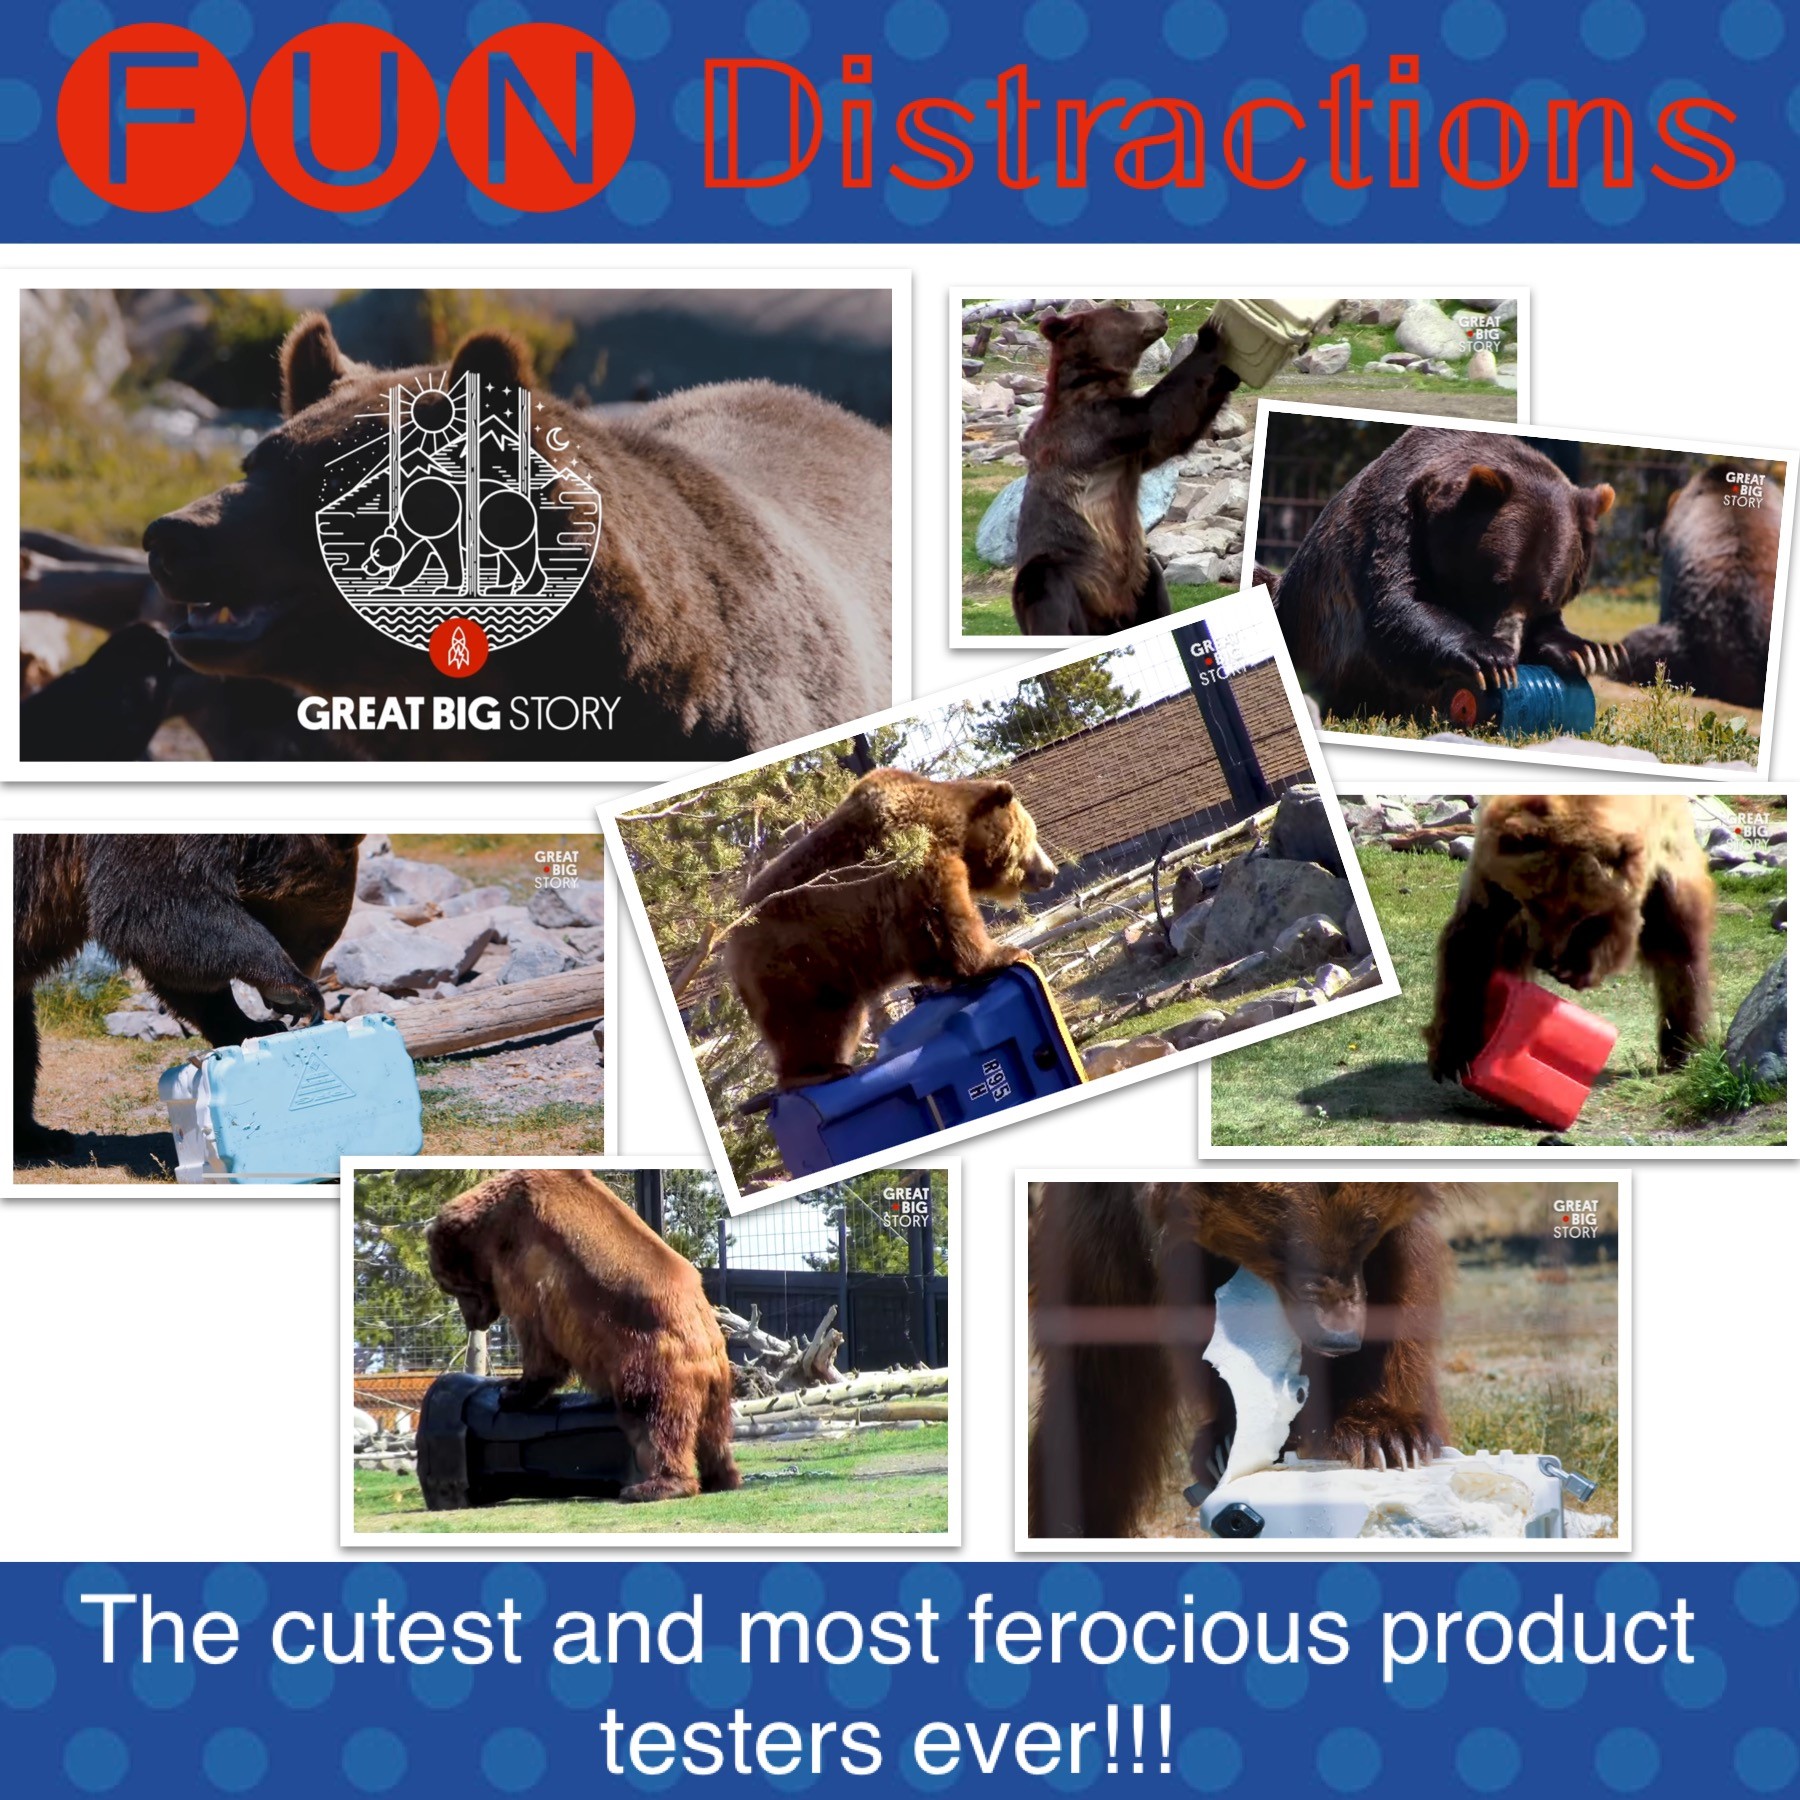 Image advertising the Library’s FUN Distractions series post about grizzly bear product testers